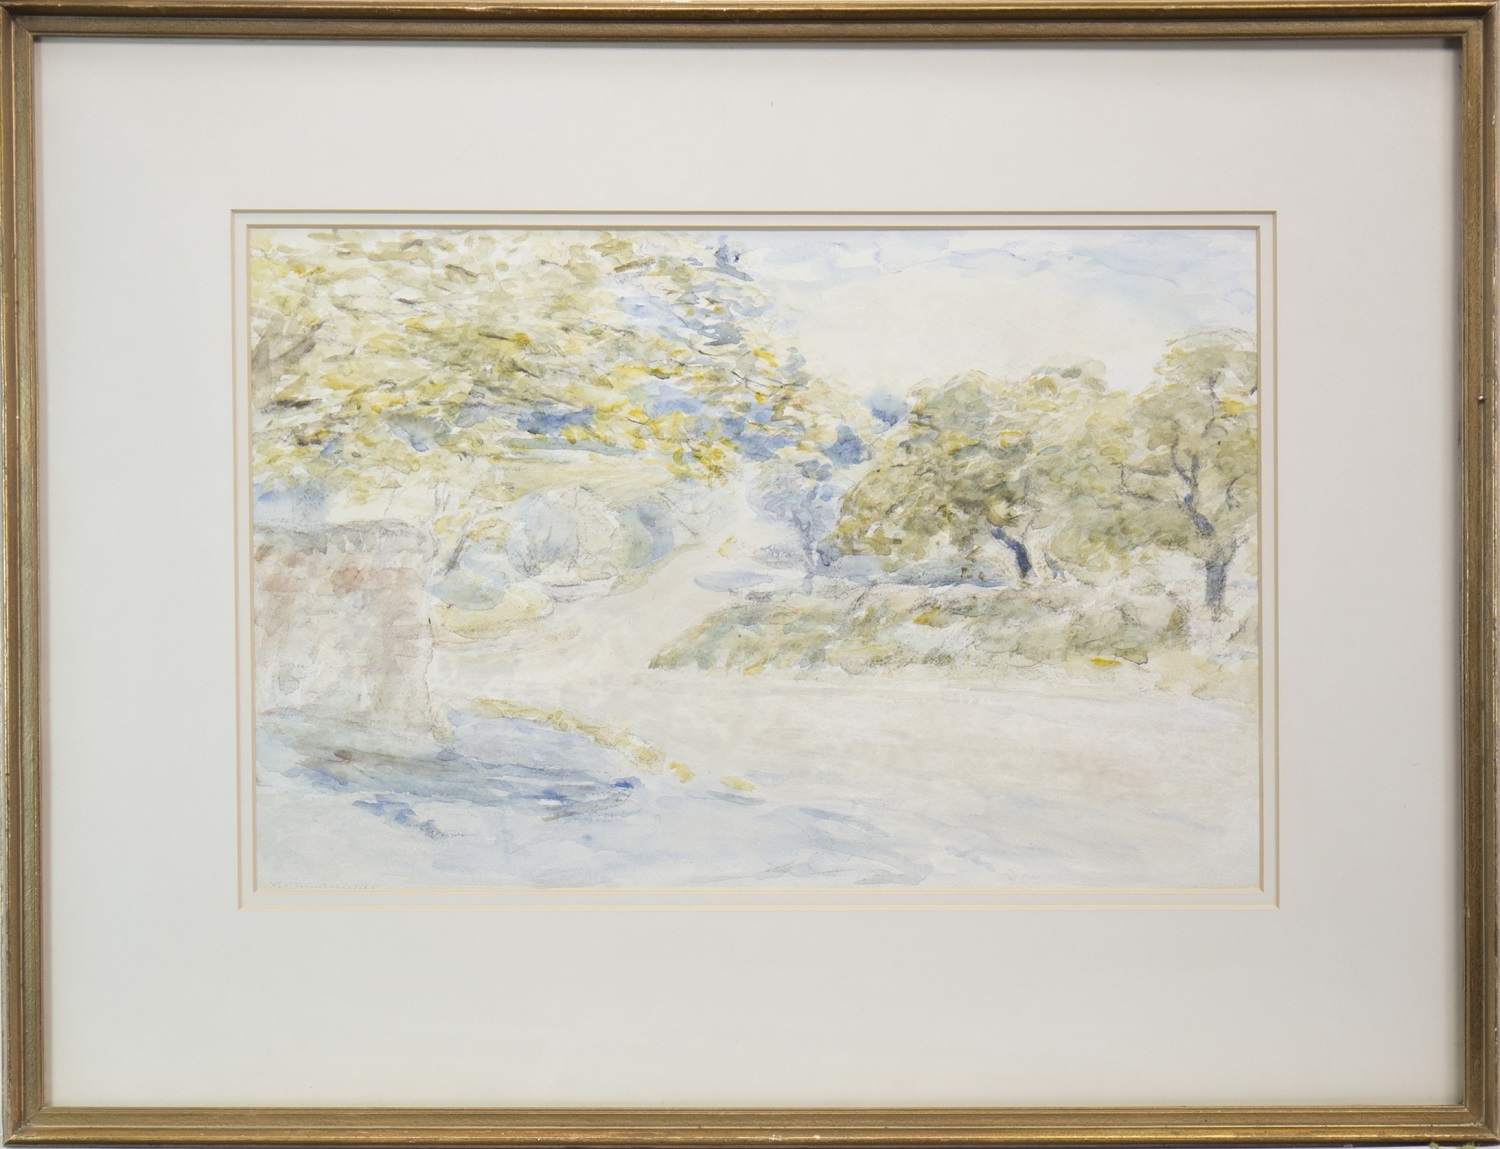 EARLY SUMMER, A WATERCOLOUR BY WILLIAM MCTAGGART - Image 2 of 2